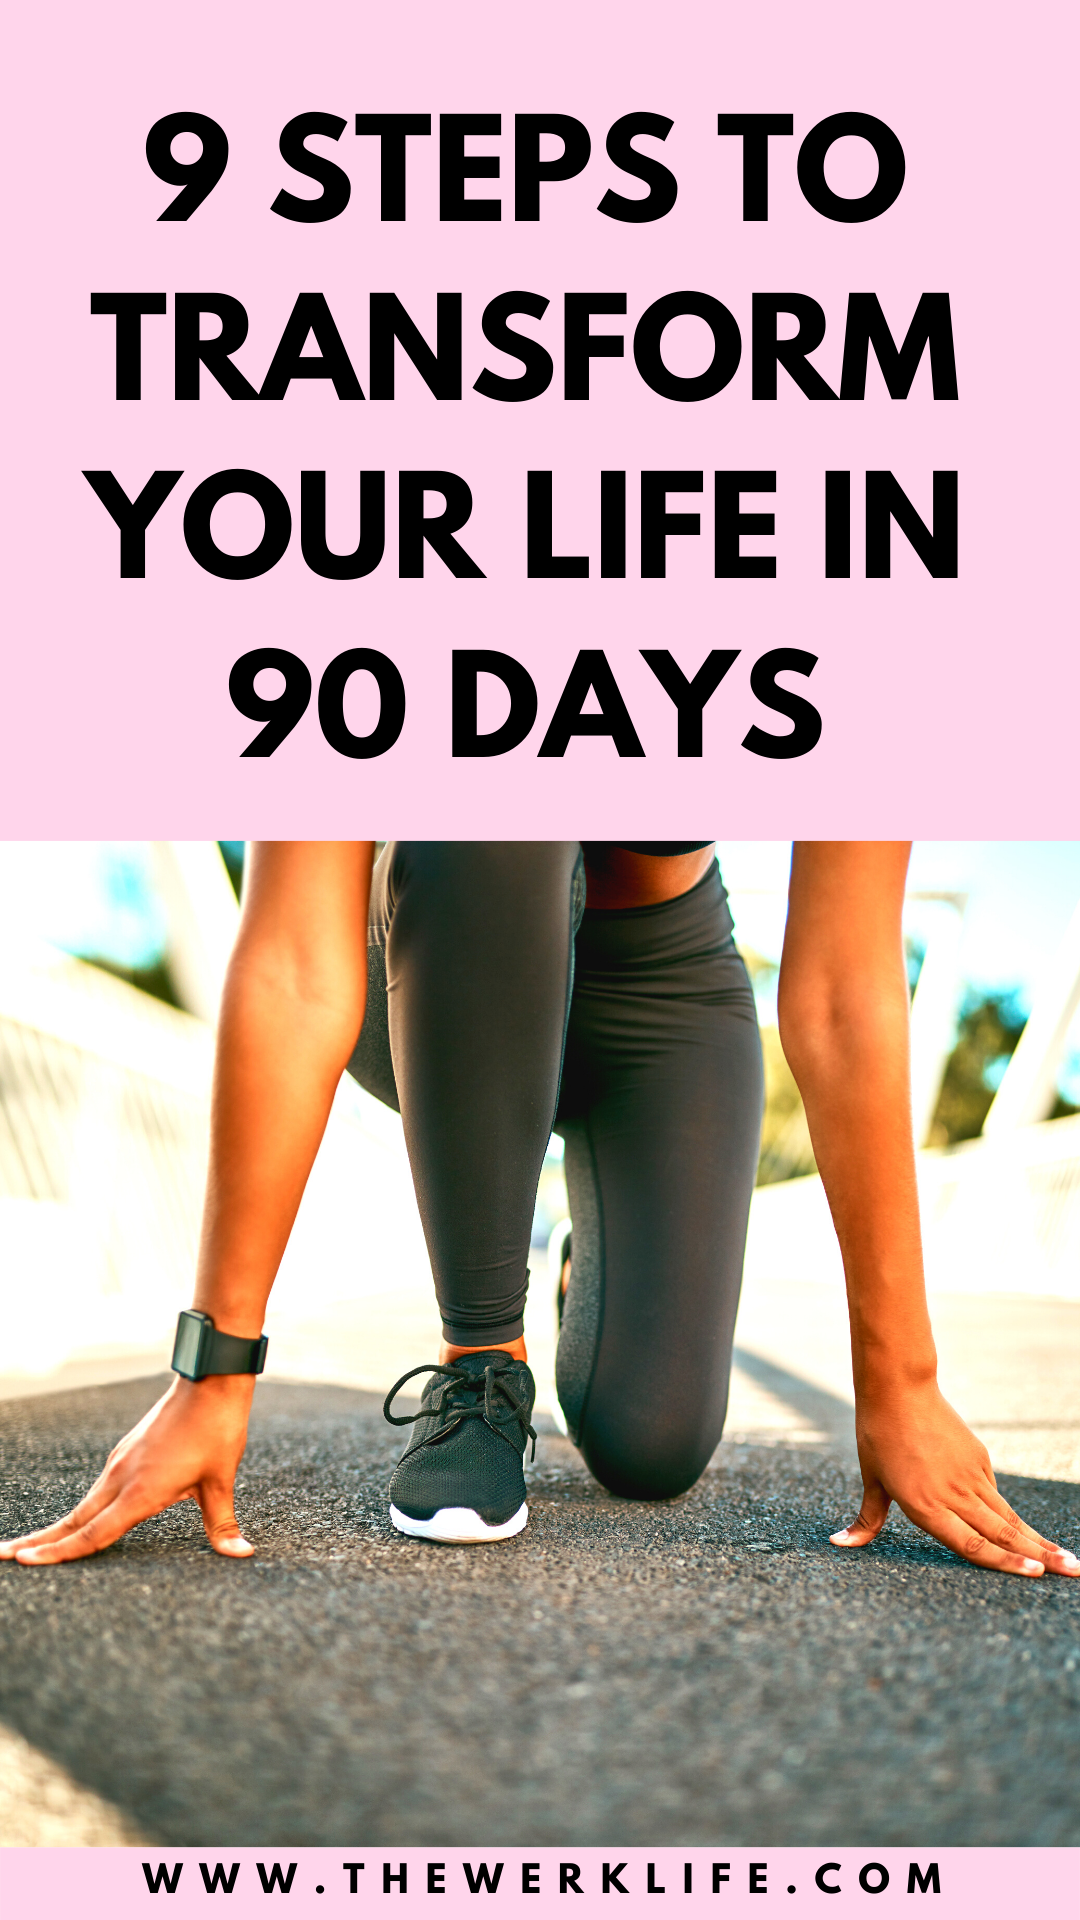 CHANGE YOUR LIFE 9 STEPS TO TRANSFORM YOUR LIFE IN 90 DAYS